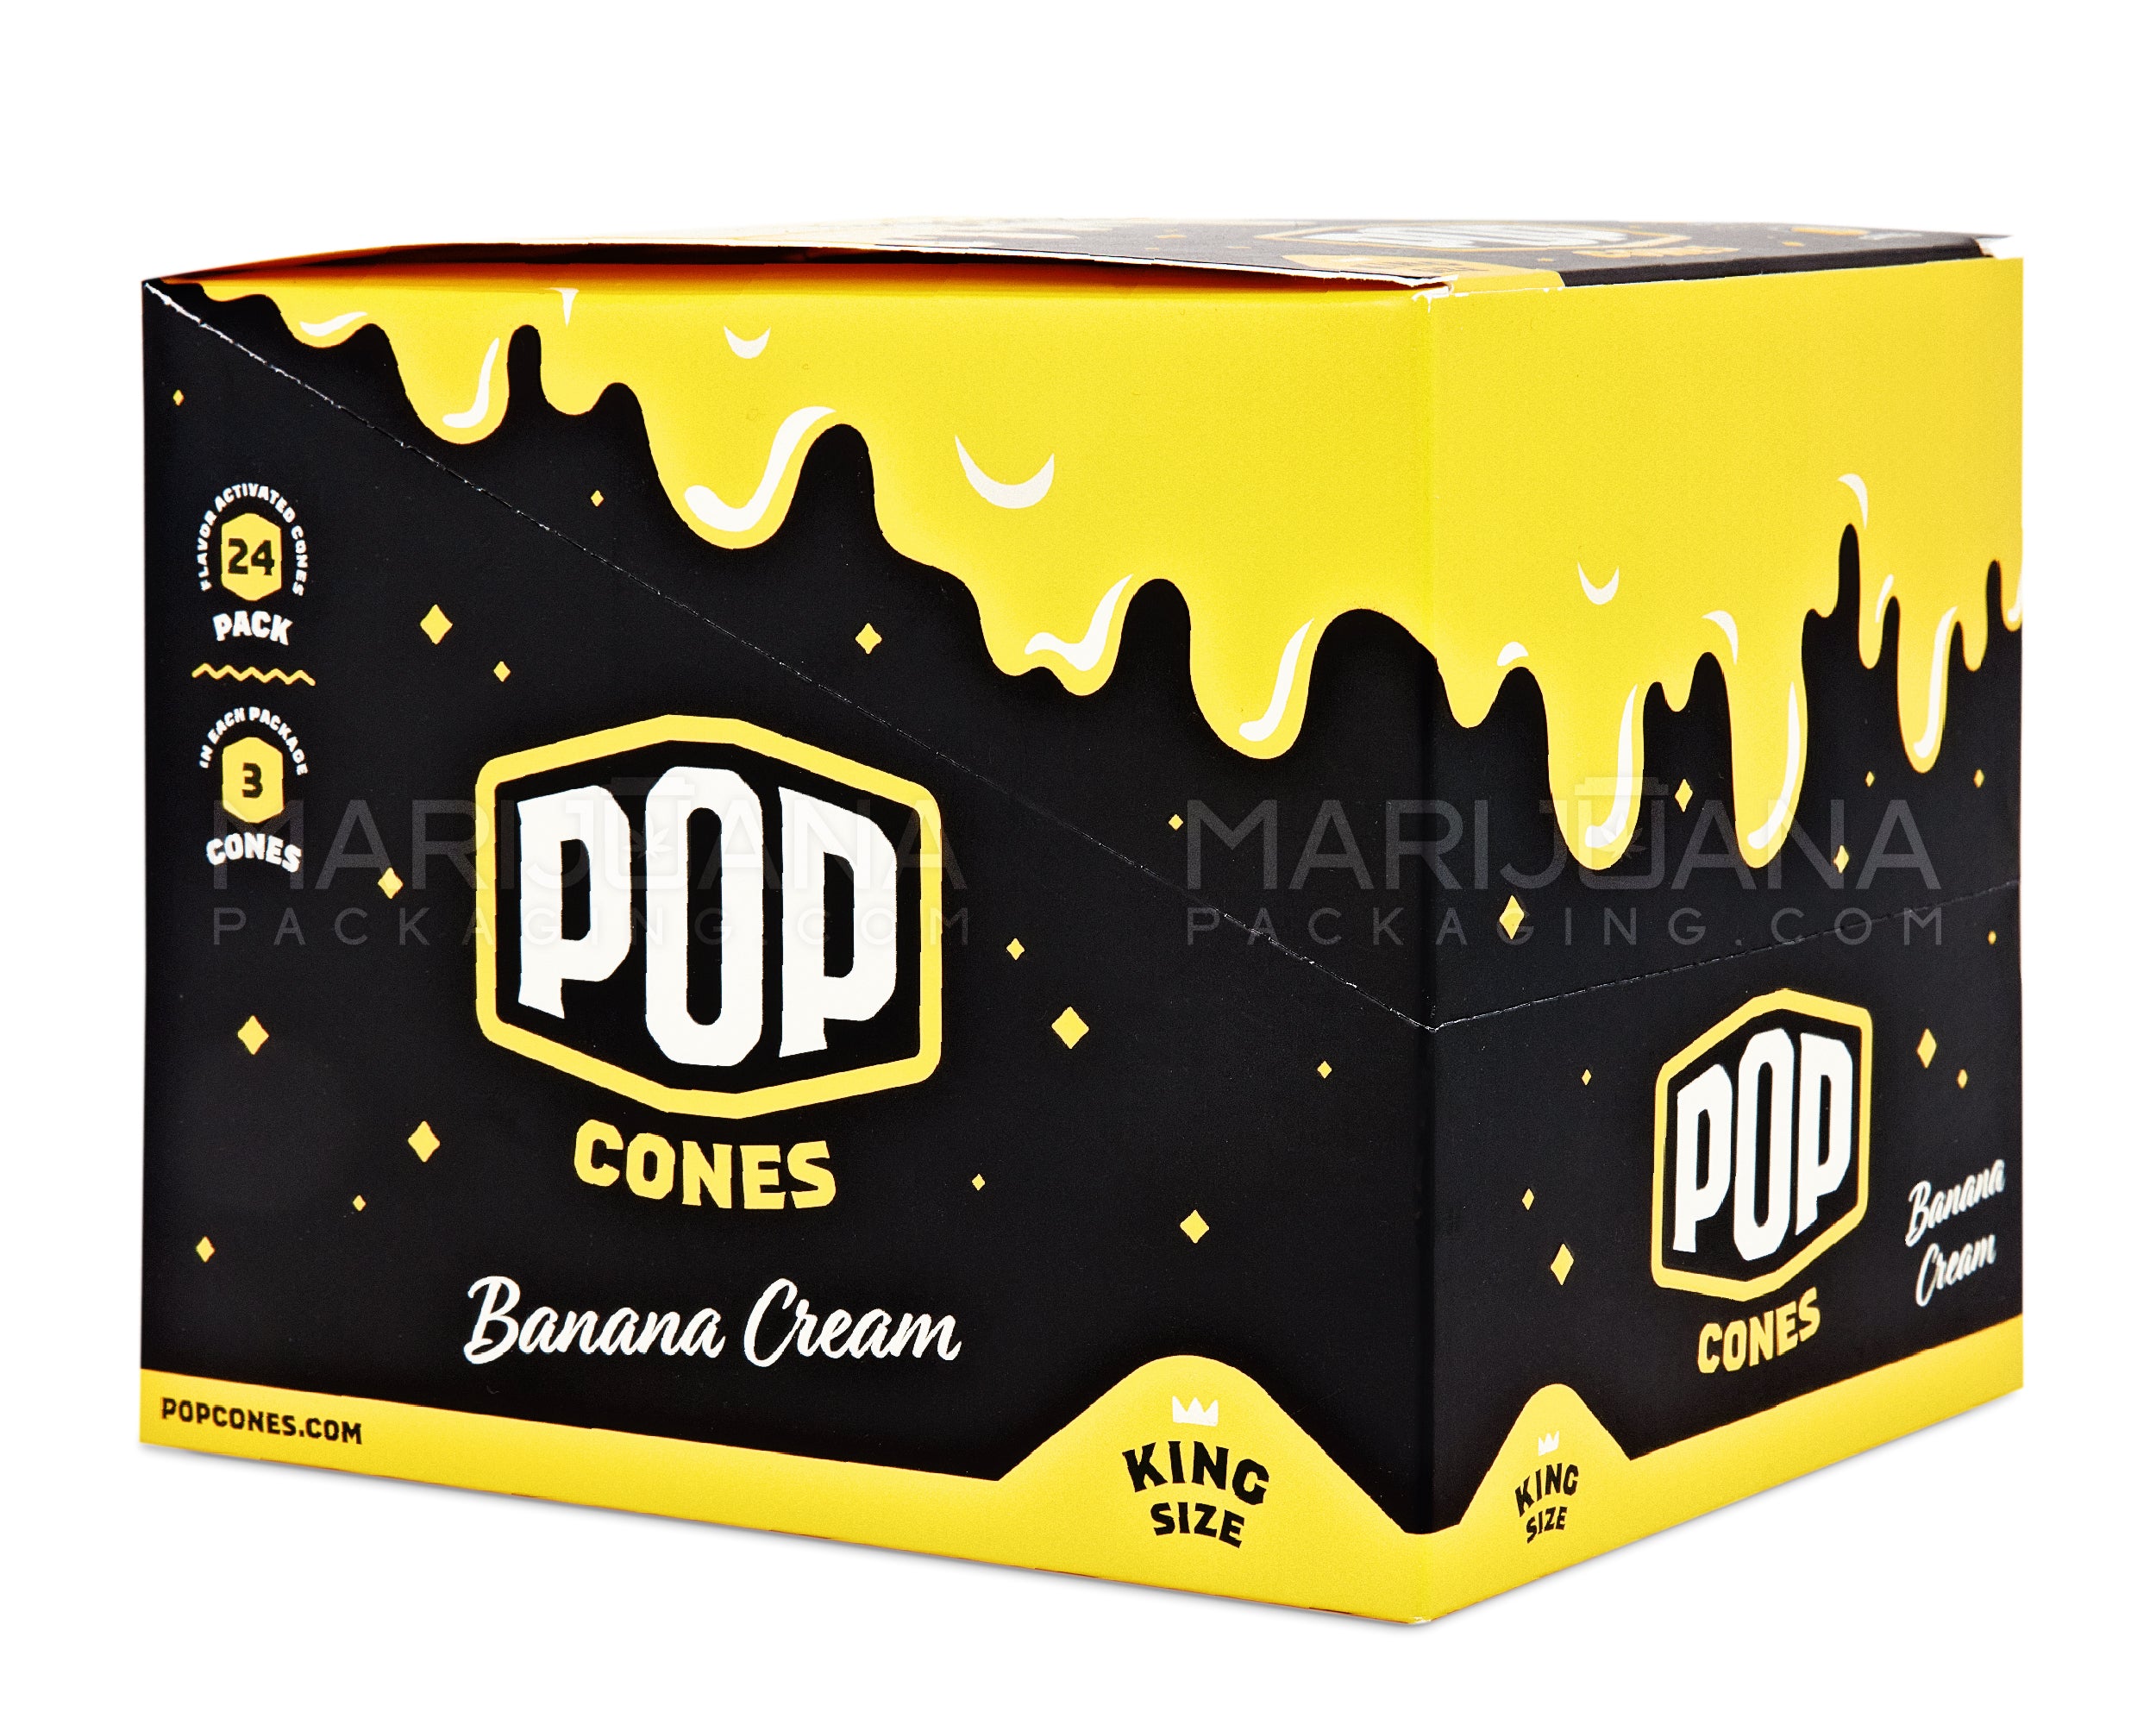 POP CONES | 'Retail Display' King Size Pre-Rolled Cones | 109mm - Banana Cream - 24 Count - 6